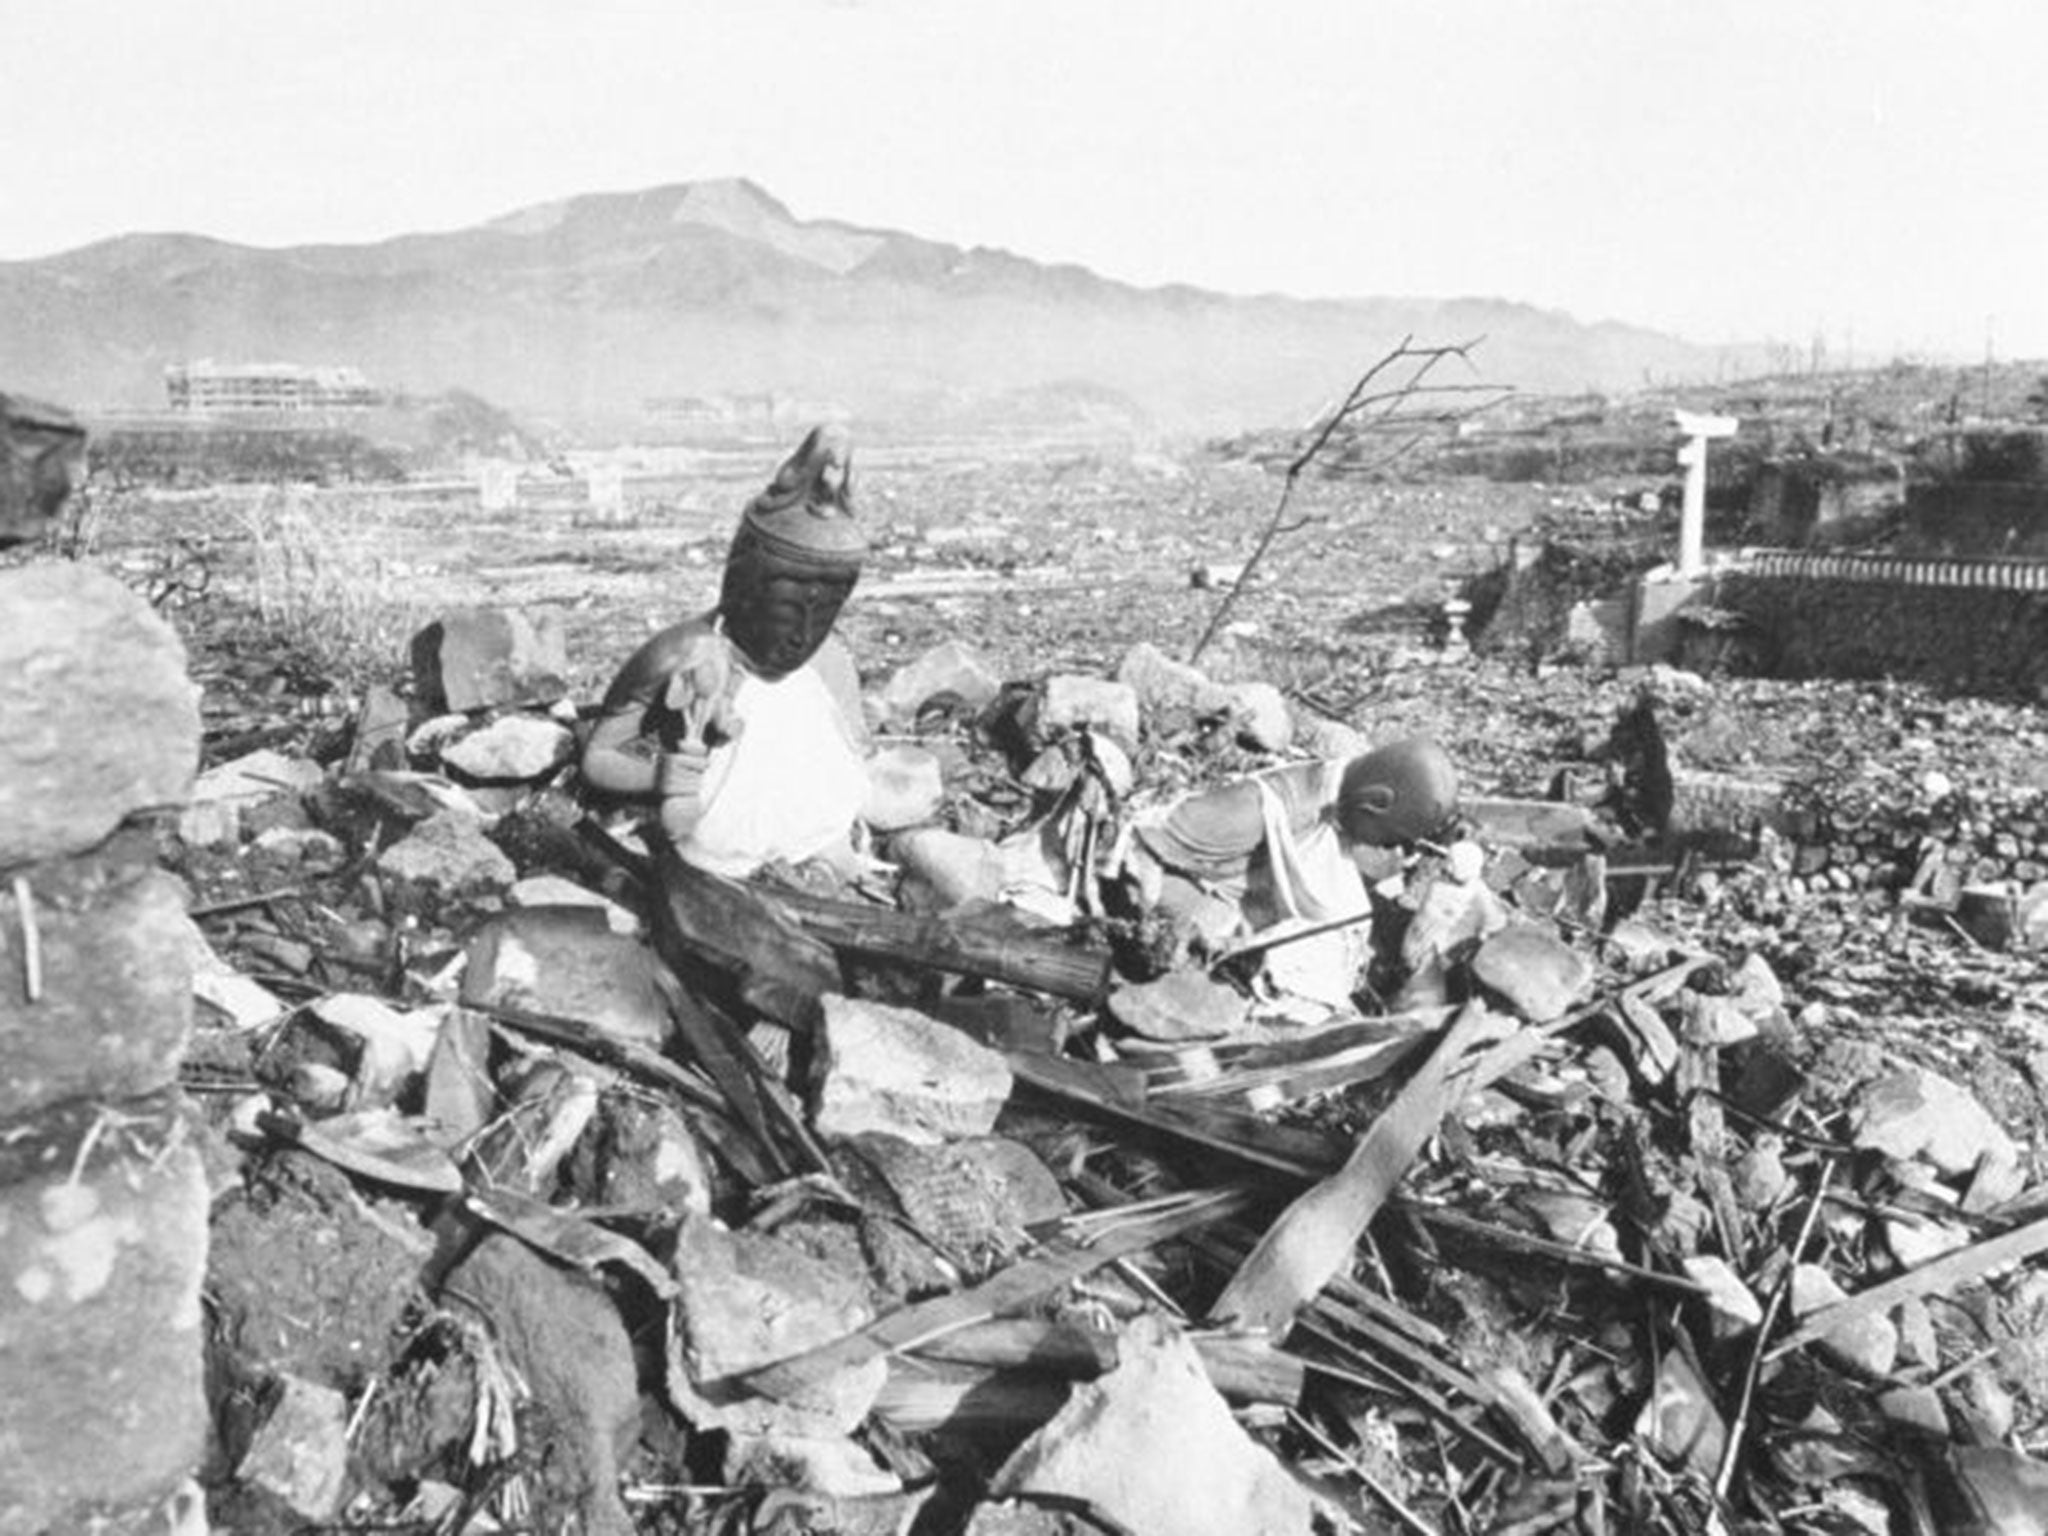 Battered religious figures stand on a hill above a tattered valley September 24, 1945 after the Americans dropped an atomic bomb in Nagasaki